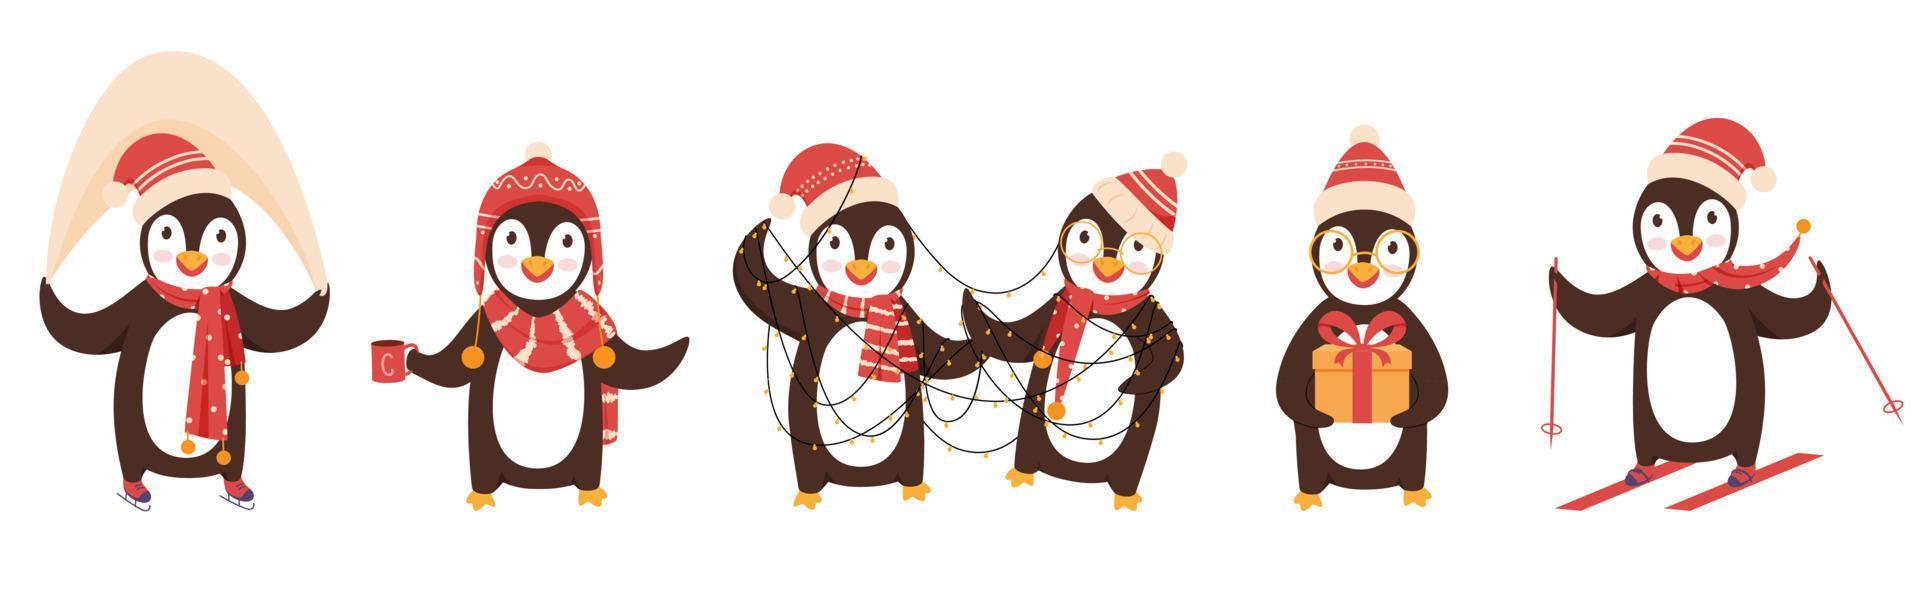 Cute Penguin Characters Wearing Woolen Hat and Scarf in Different Poses. vector